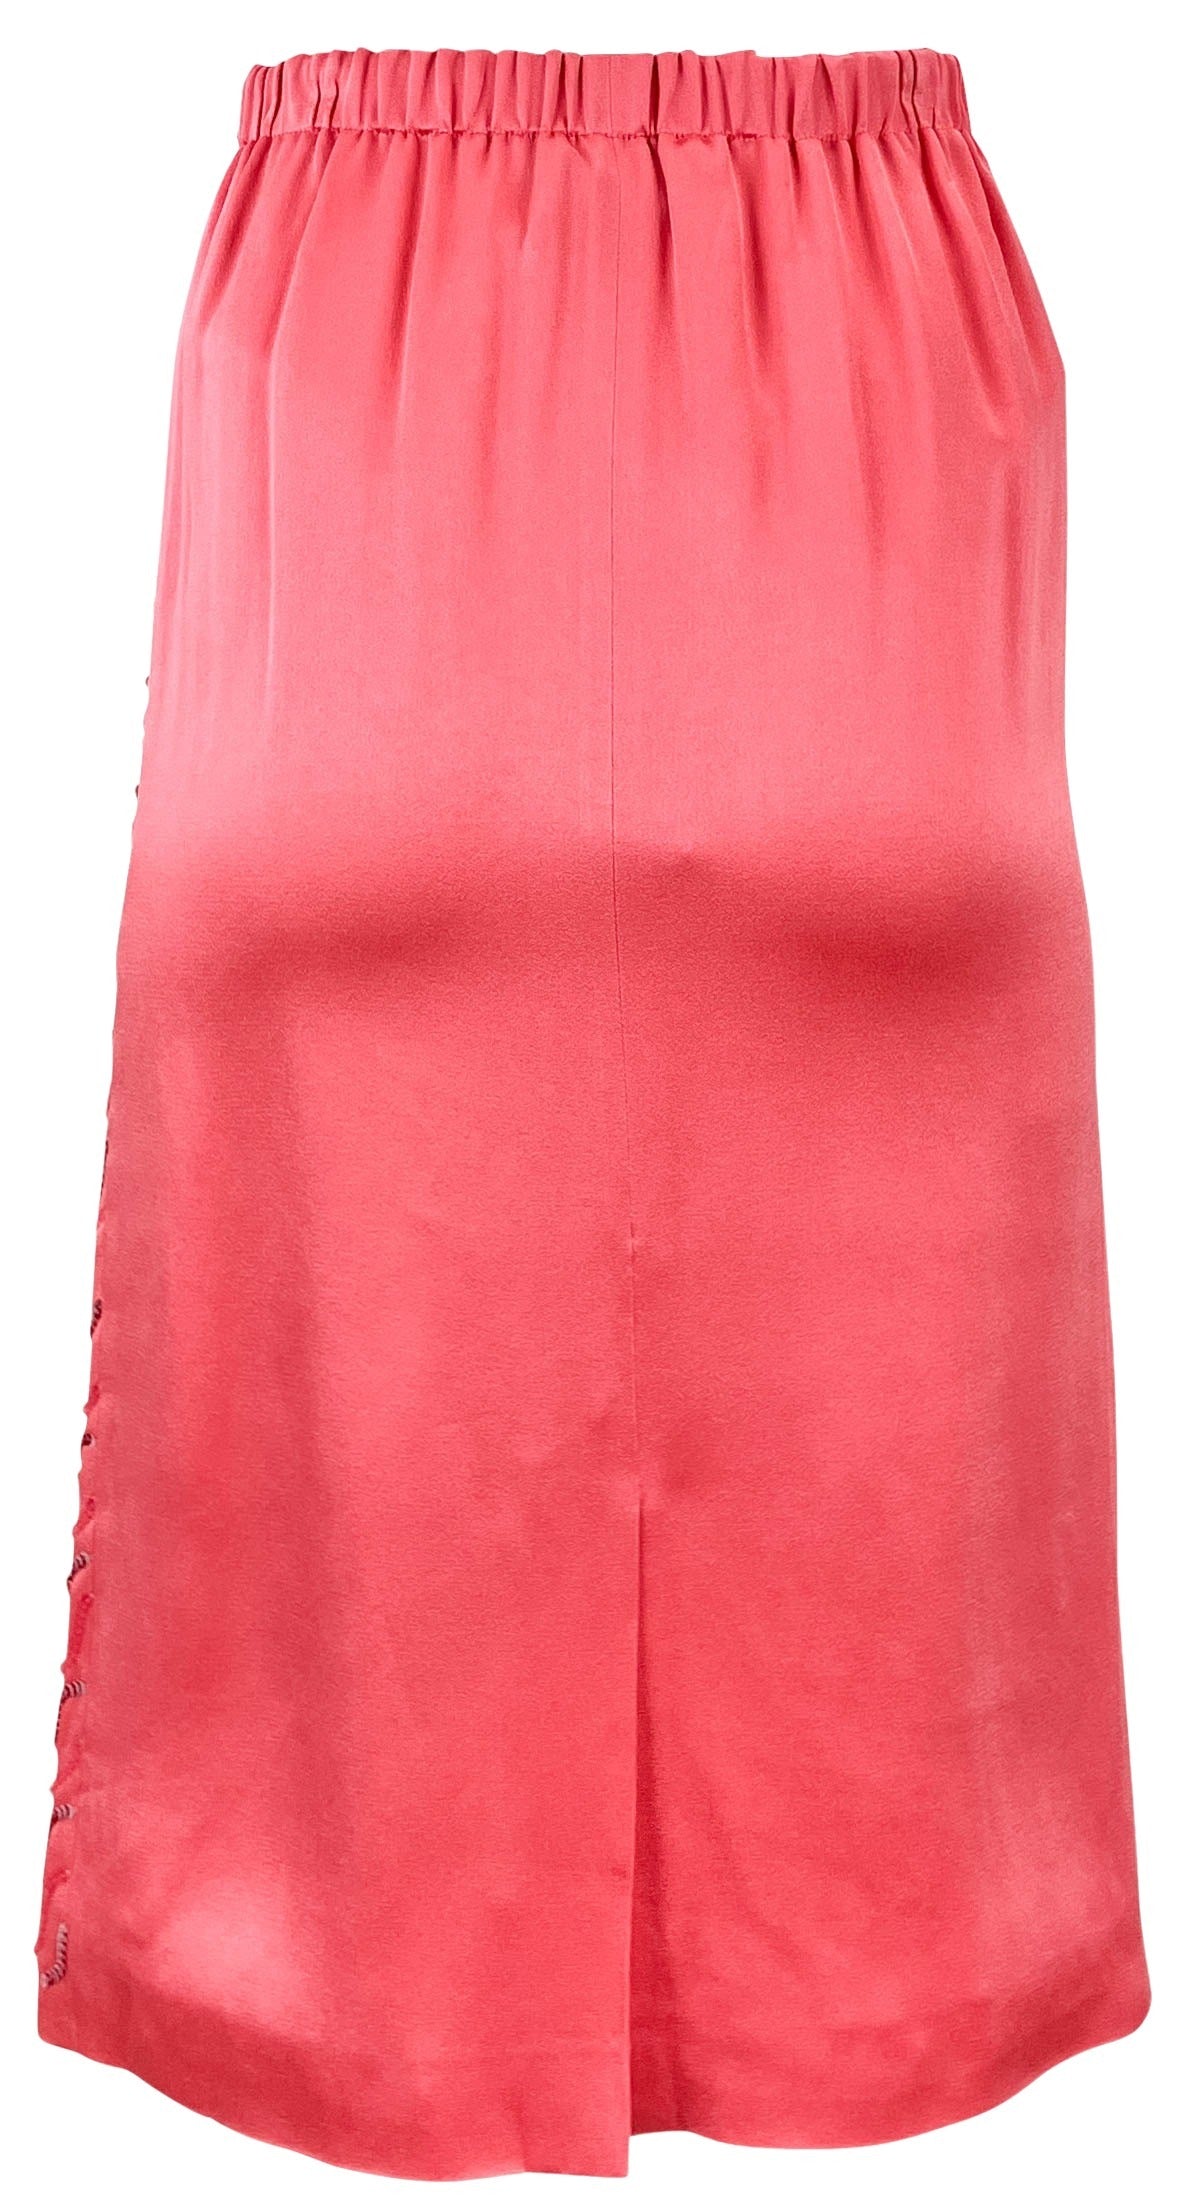 Marni Sequin Pencil Skirt in Pink Candy - Discounts on Marni at UAL